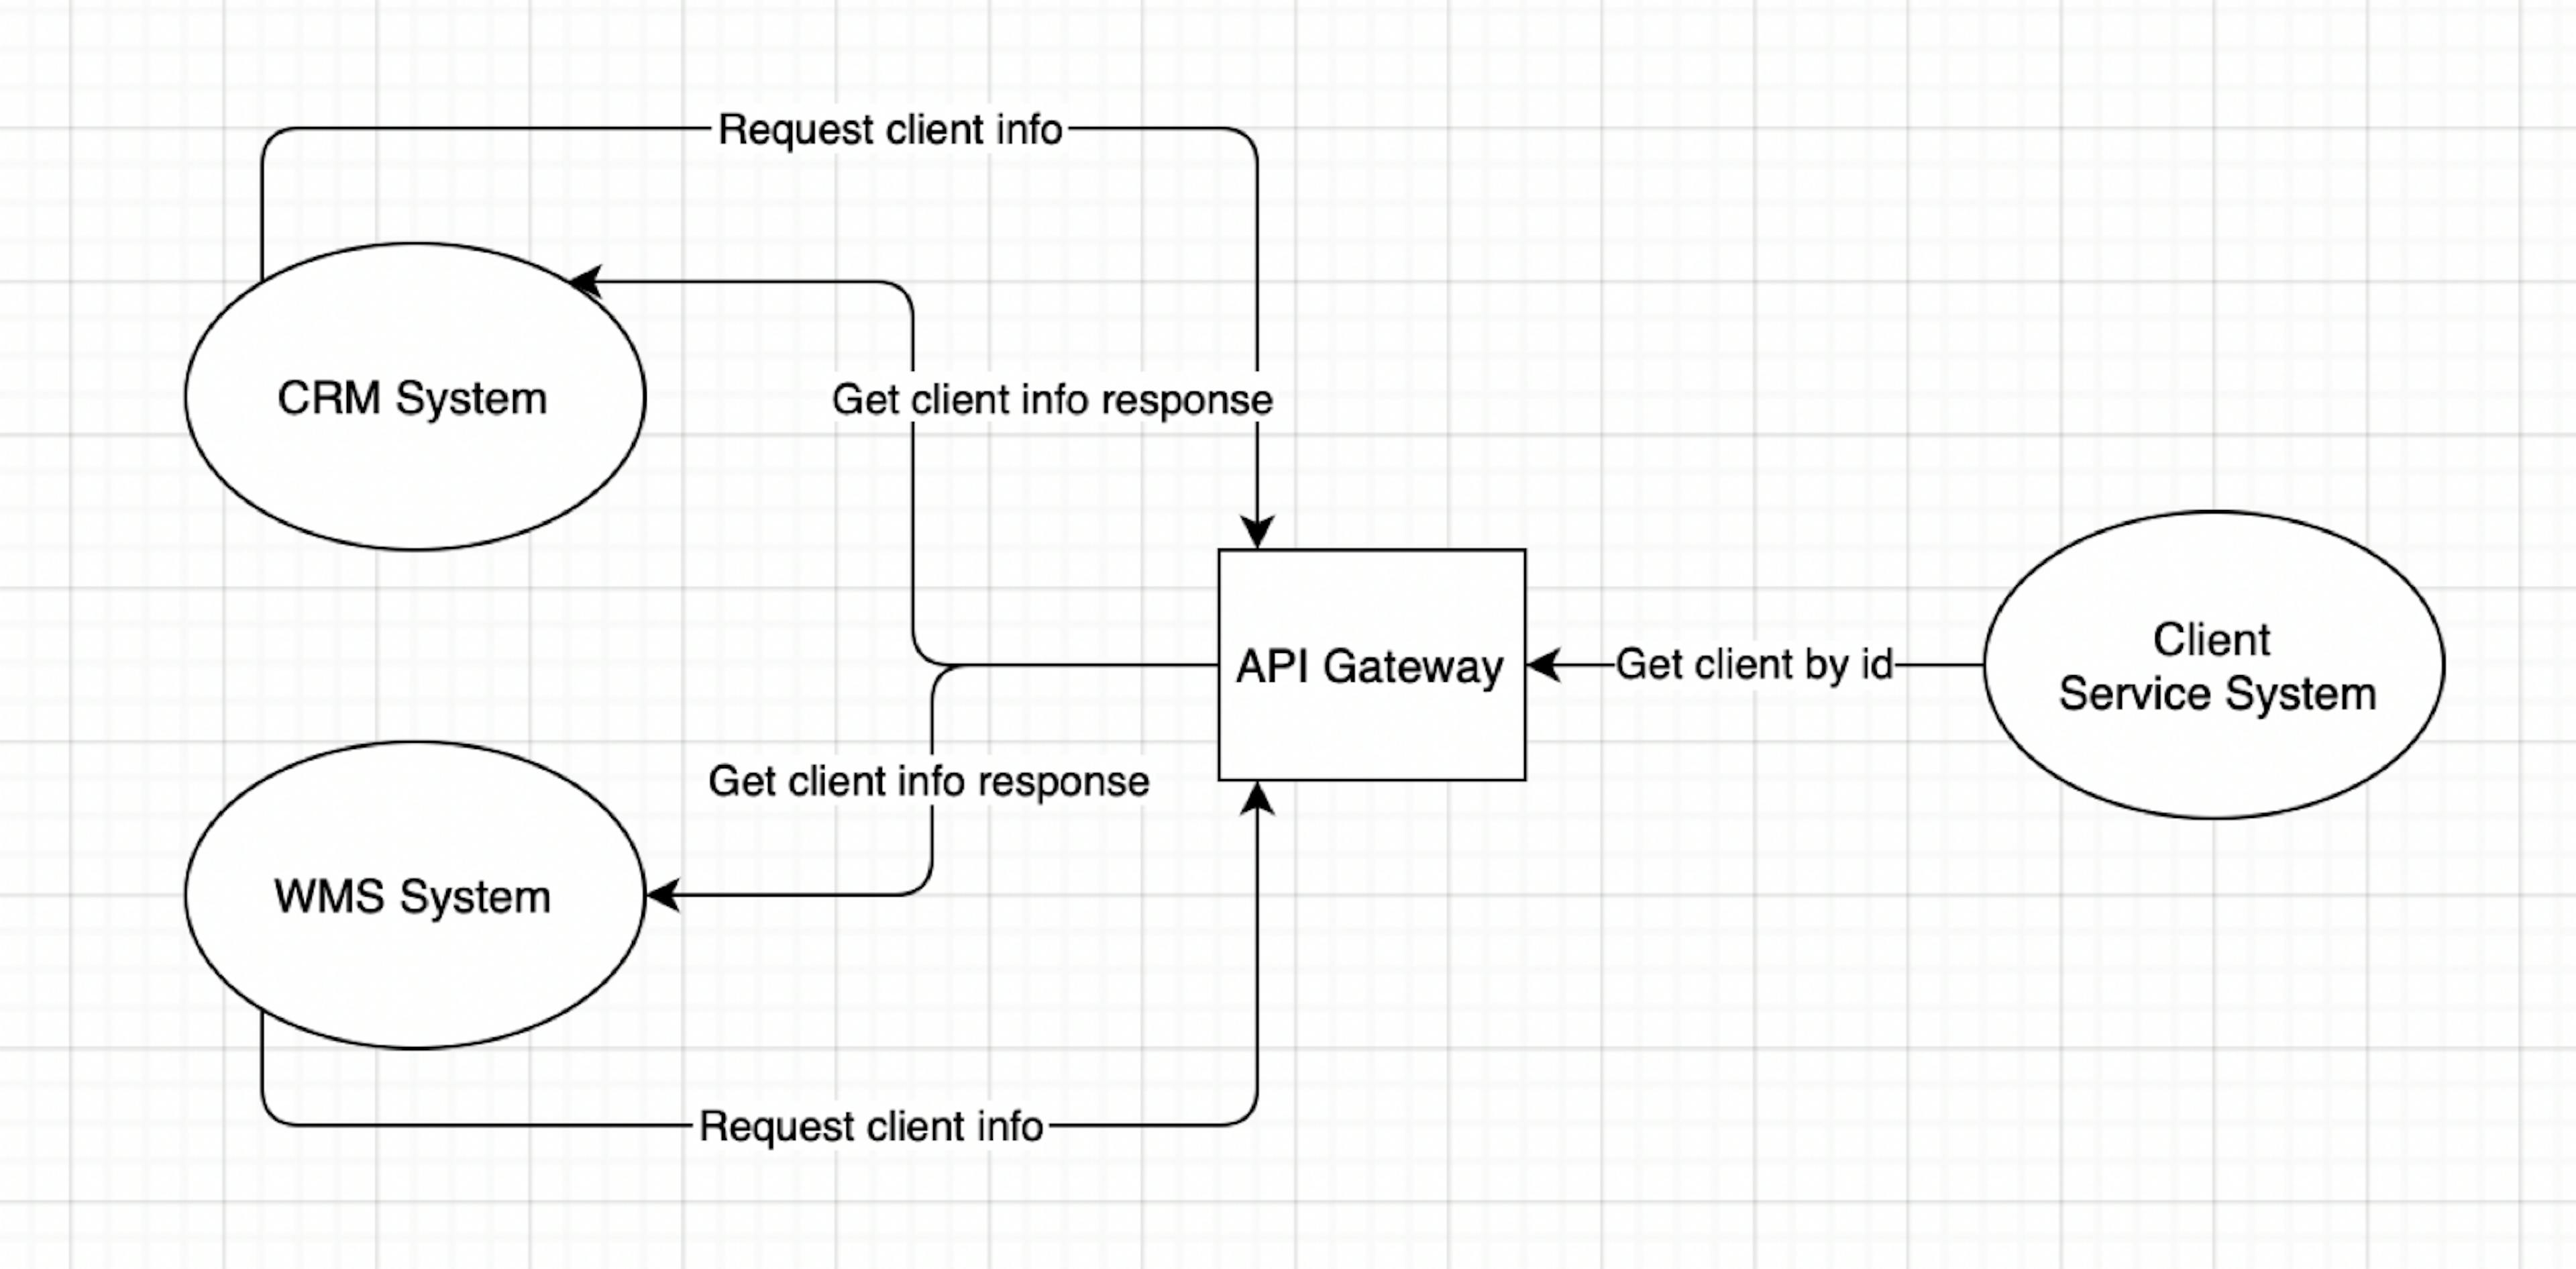 Integration of CRM and WMS Systems using API Gateway